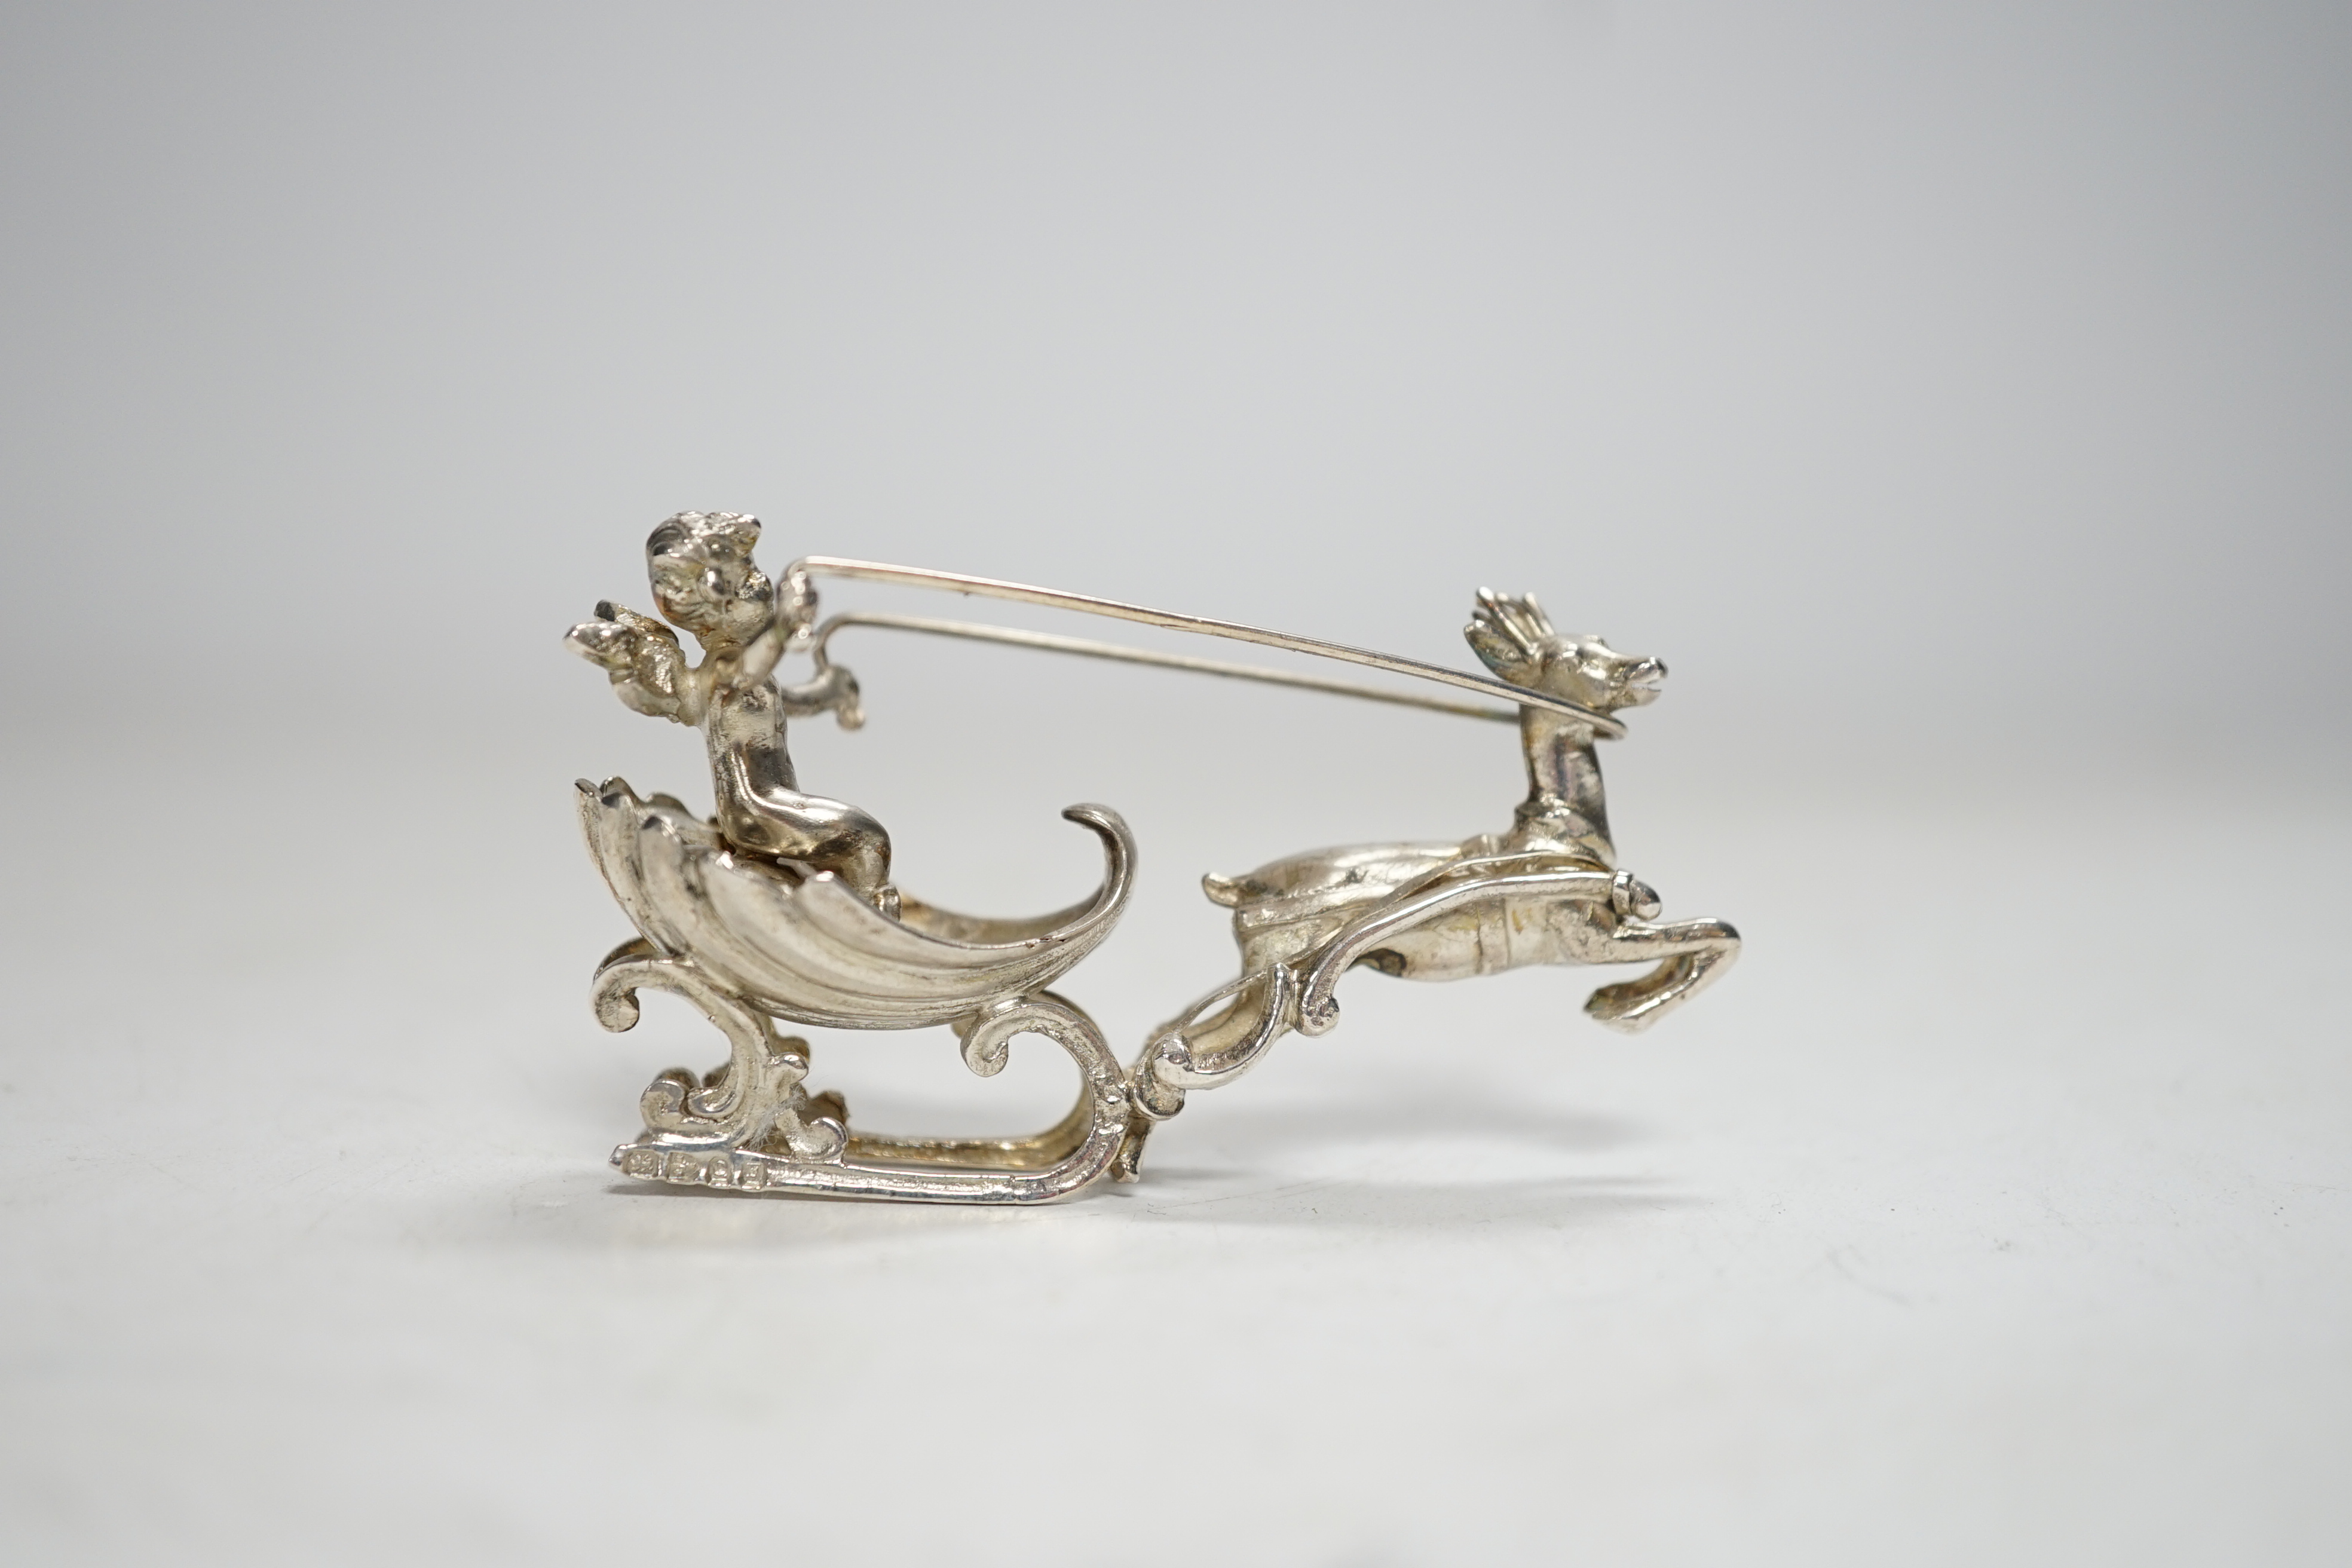 A late 19th century Hanau miniature silver model of a deer pulling a sleigh with cherub, by Berthold Muller, import marks for Chester, 1899, length 64mm.